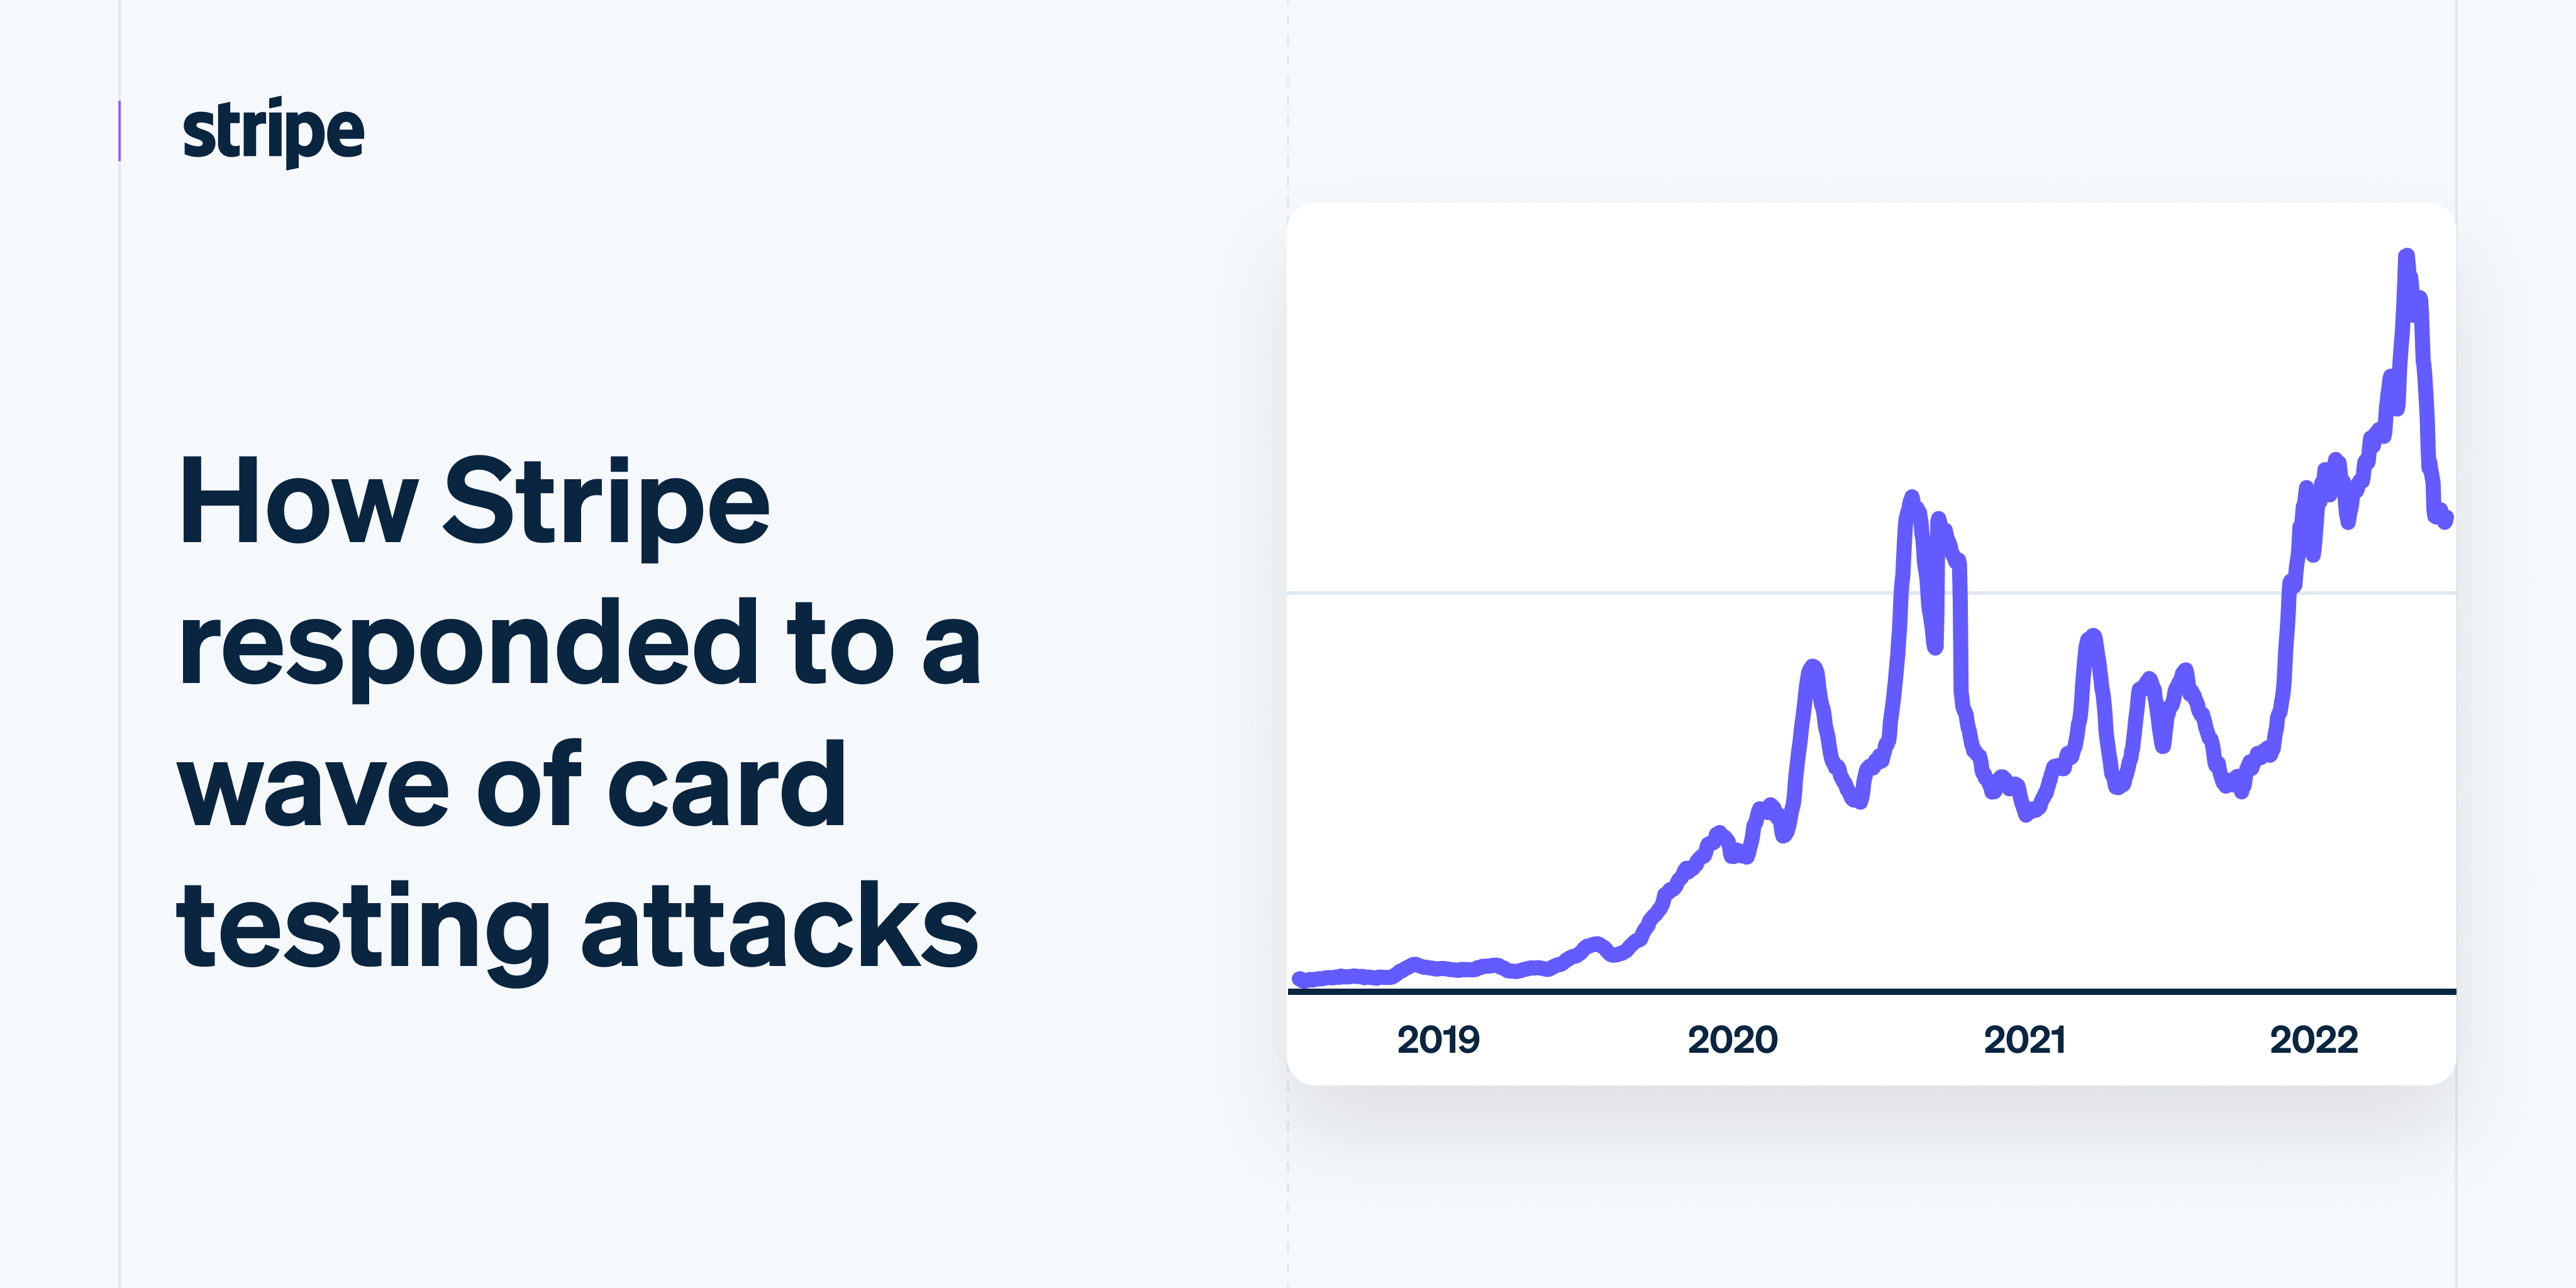 How Stripe responded to a wave of card testing attacks